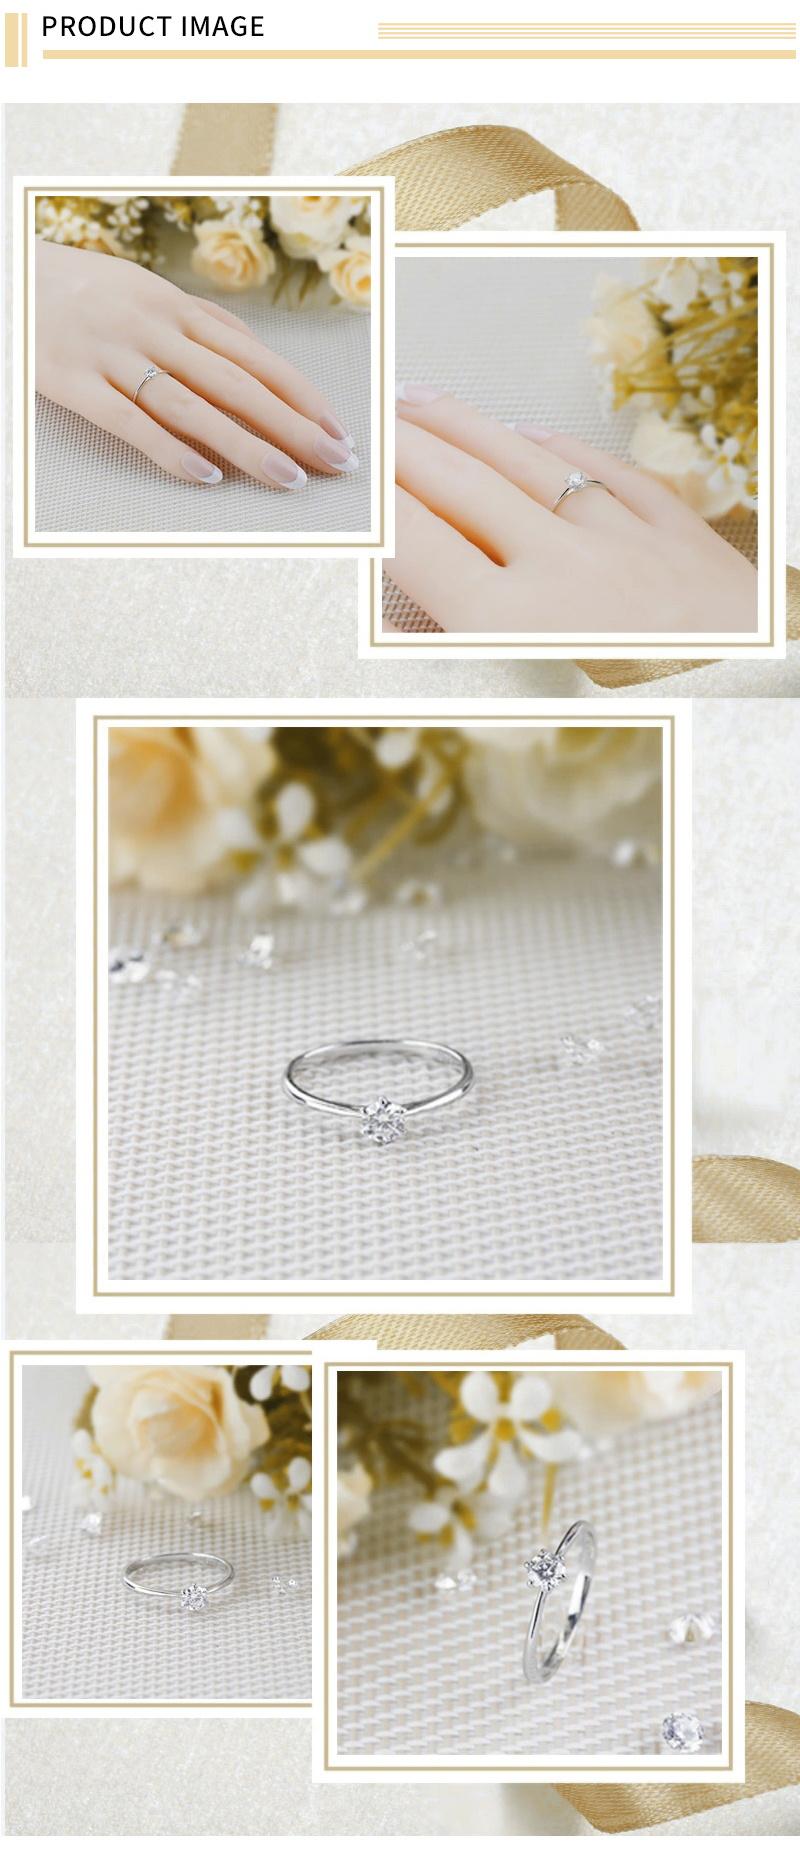 Hot Sale Plain 925 Sterling Silver Ring High Quality Metal Rings